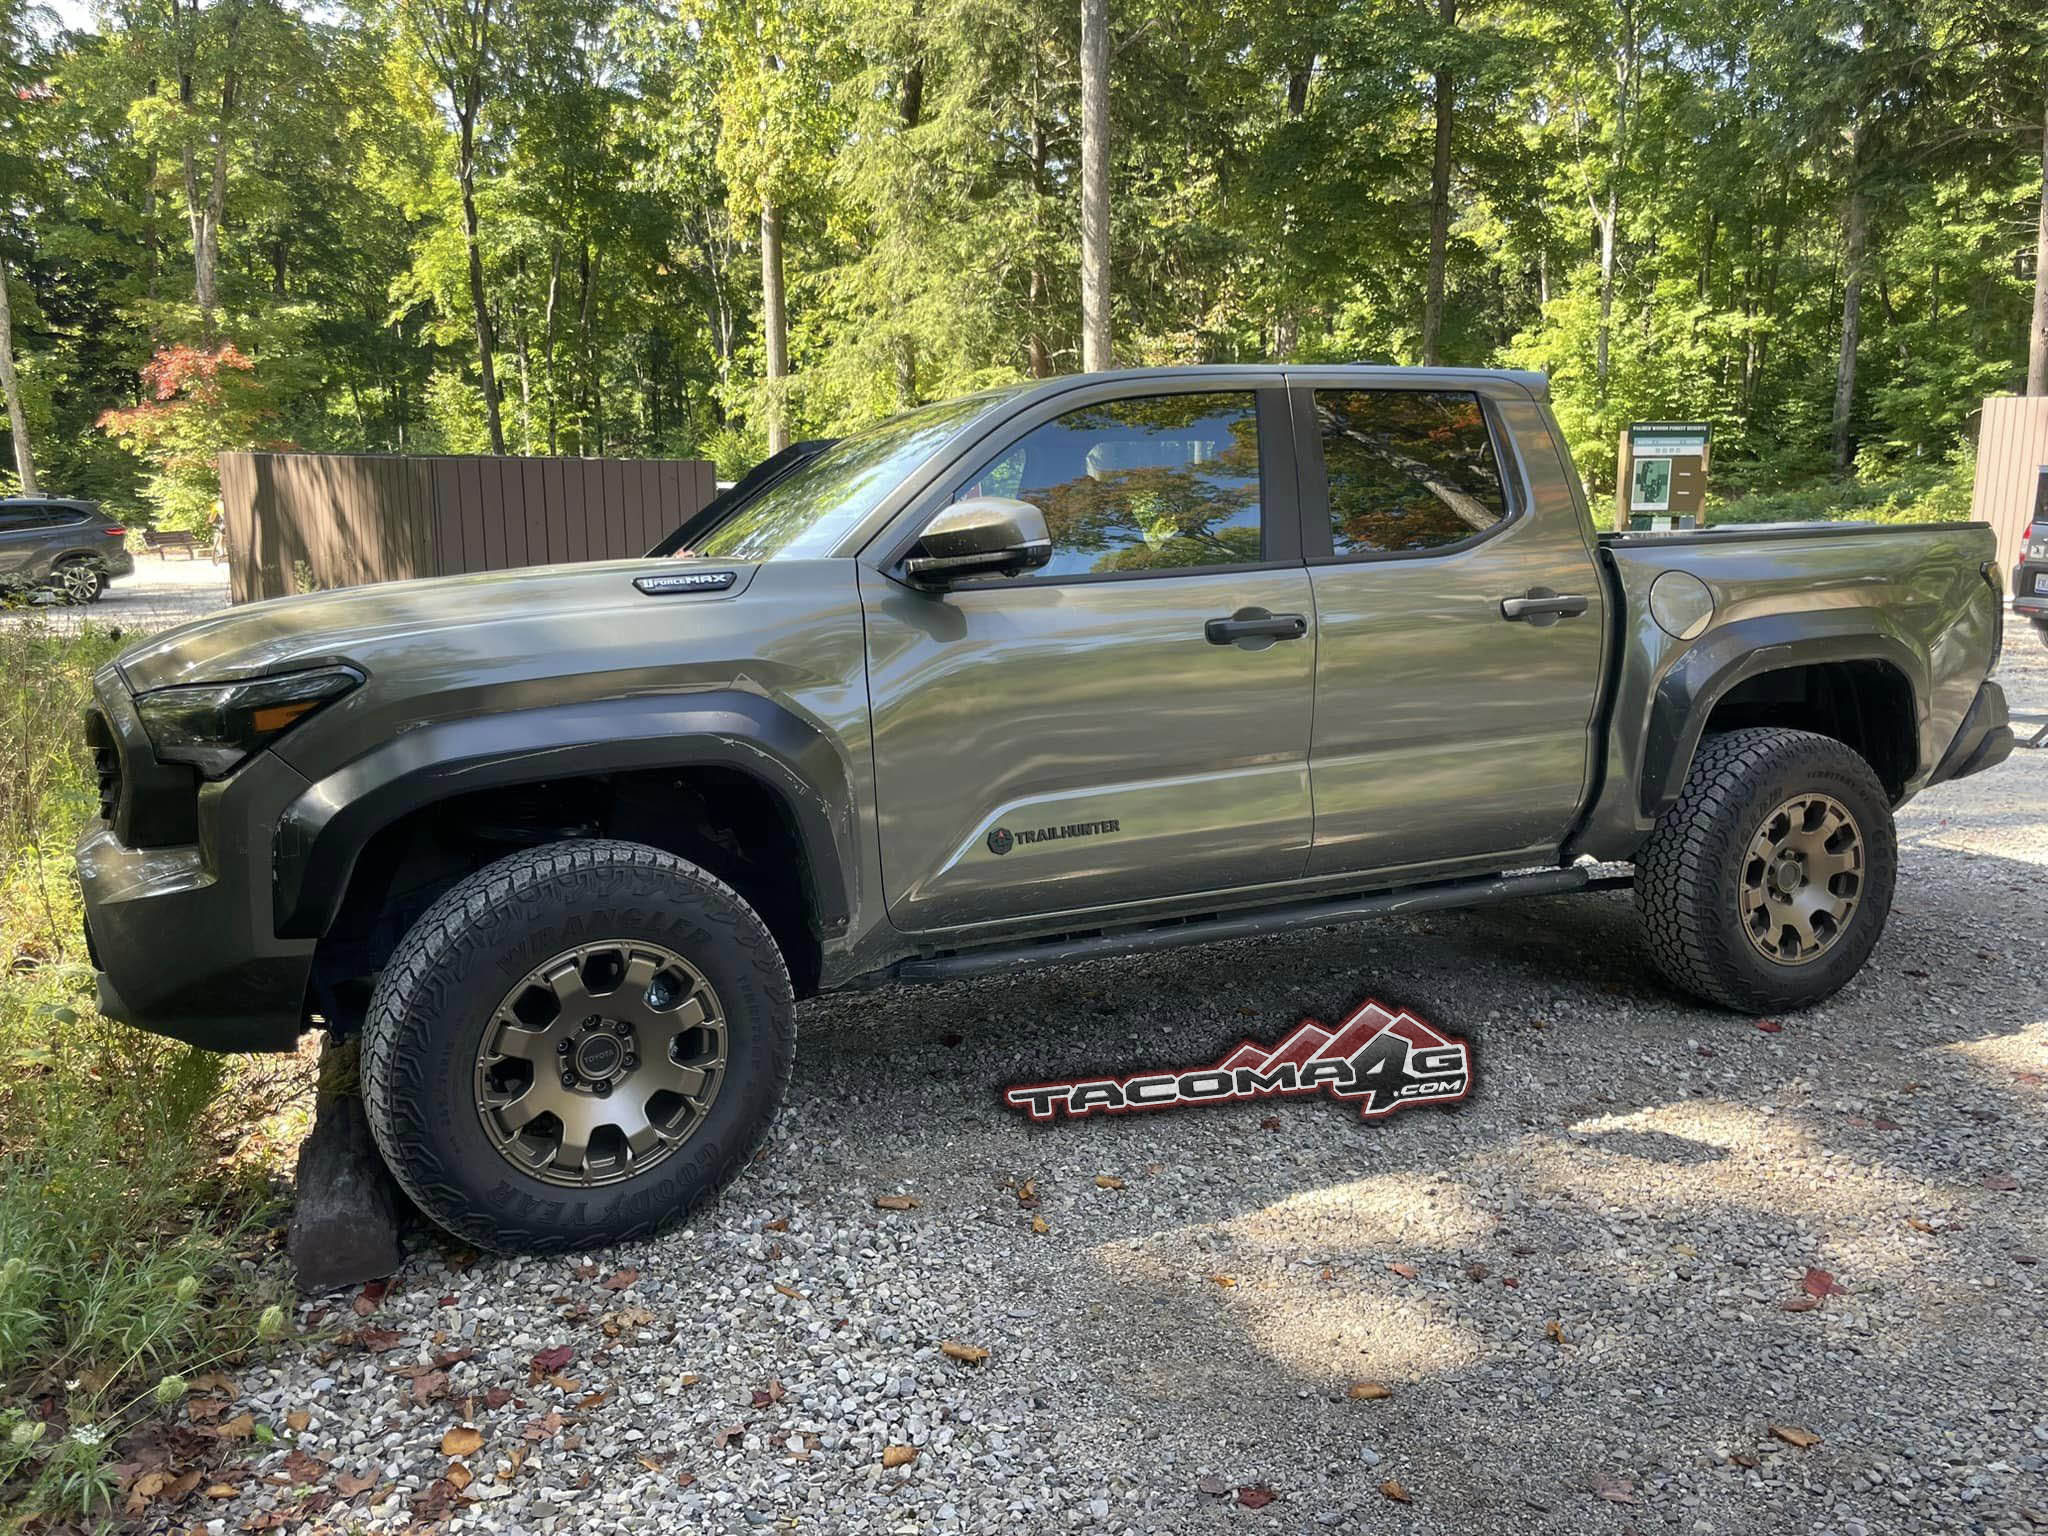 2024 Tacoma Short Bed (5' Foot) 2024 Tacoma first sighting! (Bronze Oxide Trailhunter spotted in wild) 5 foot Short Bed 2024 Toyota Tacoma Trail hunter Bronze Oxide 3